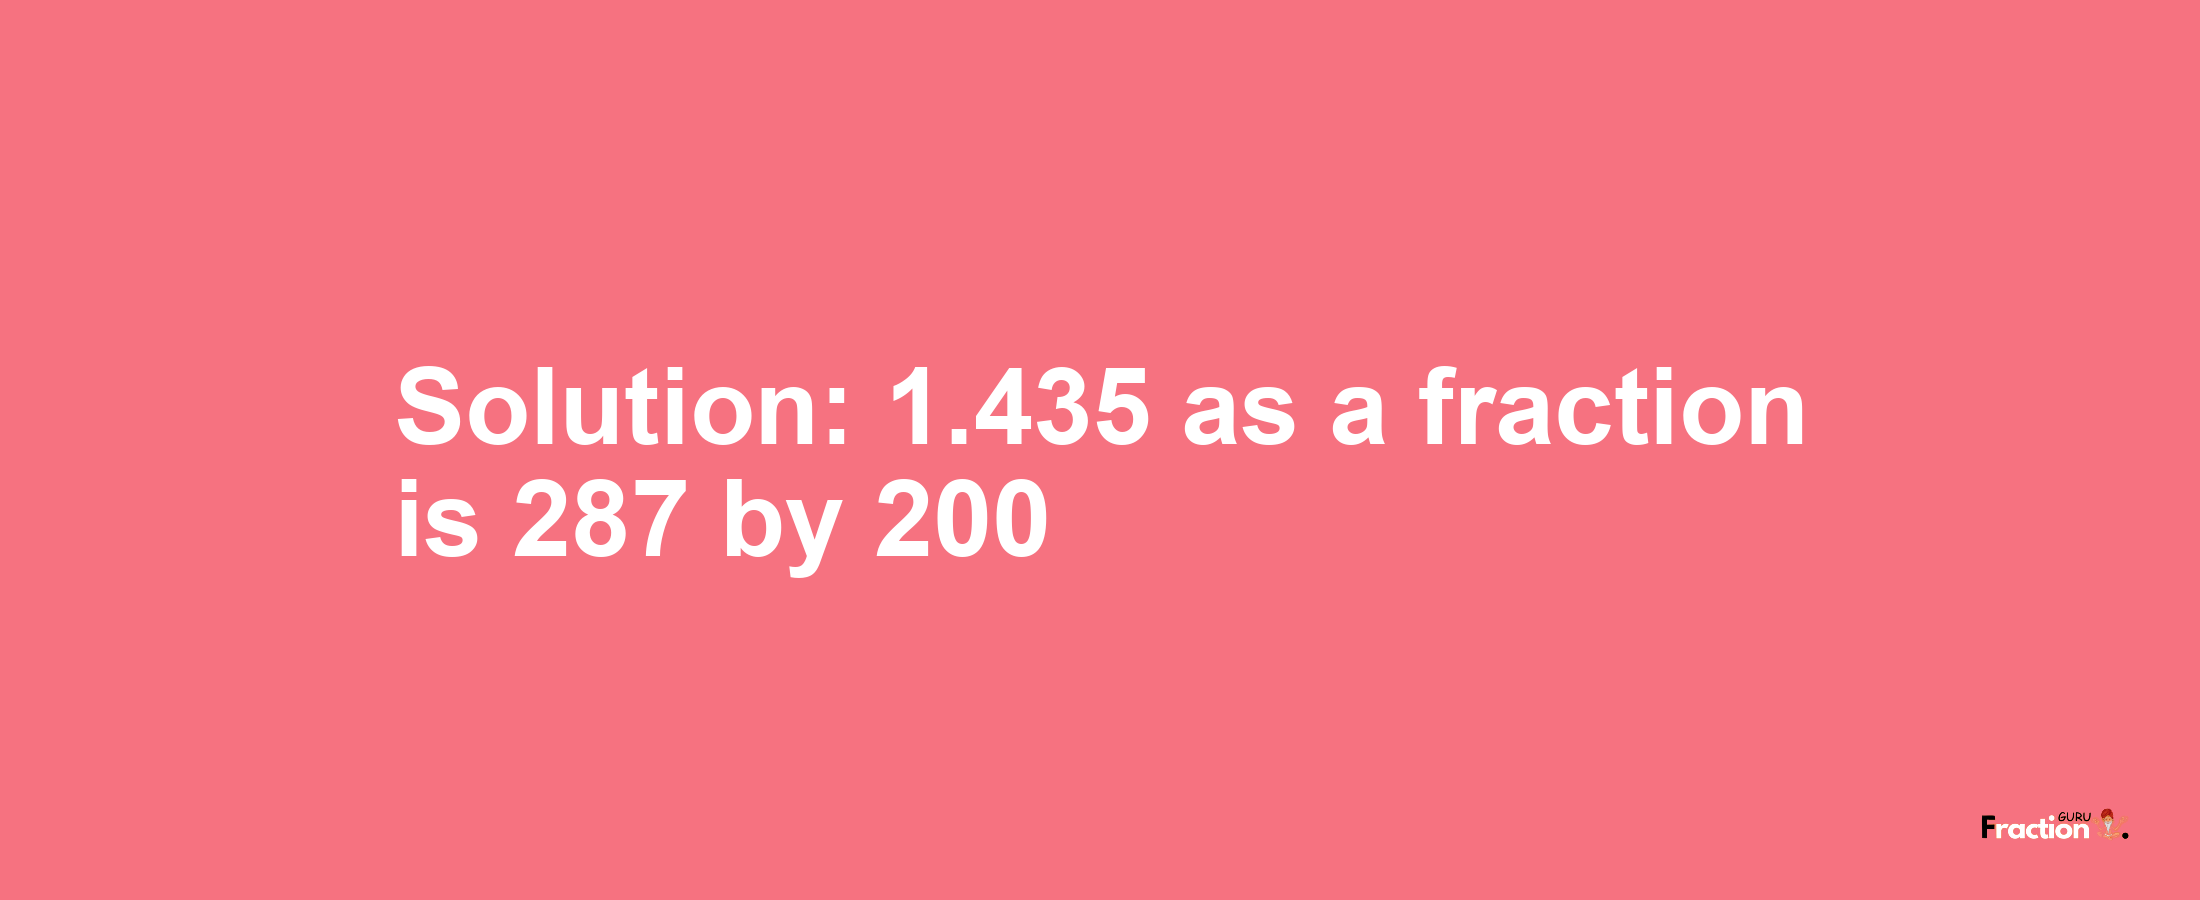 Solution:1.435 as a fraction is 287/200